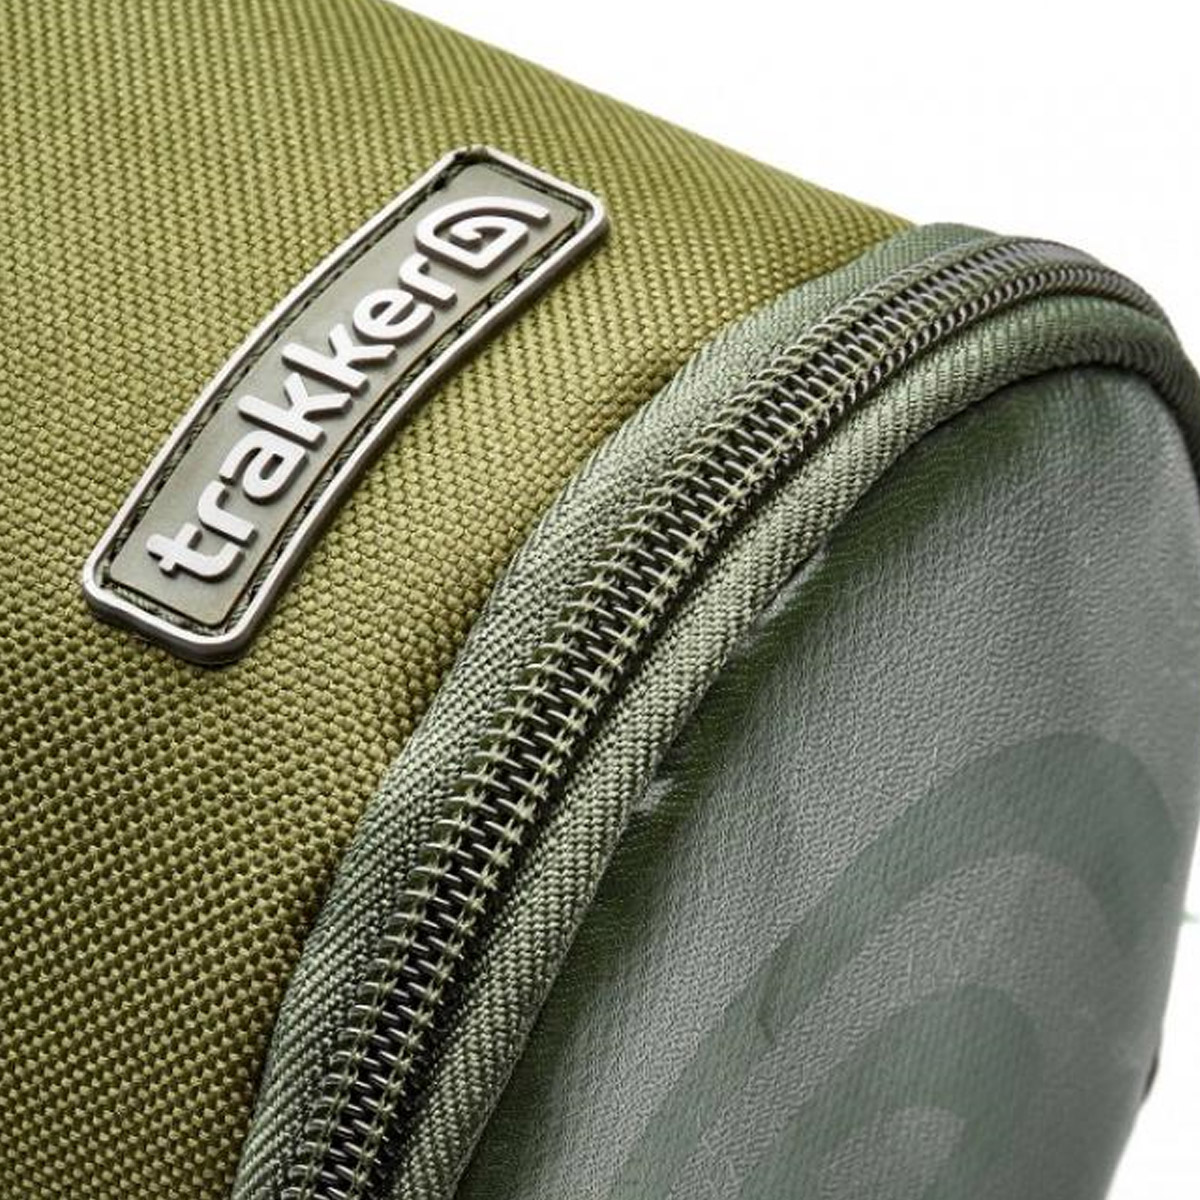 Trakker nxg insulated gas can cover